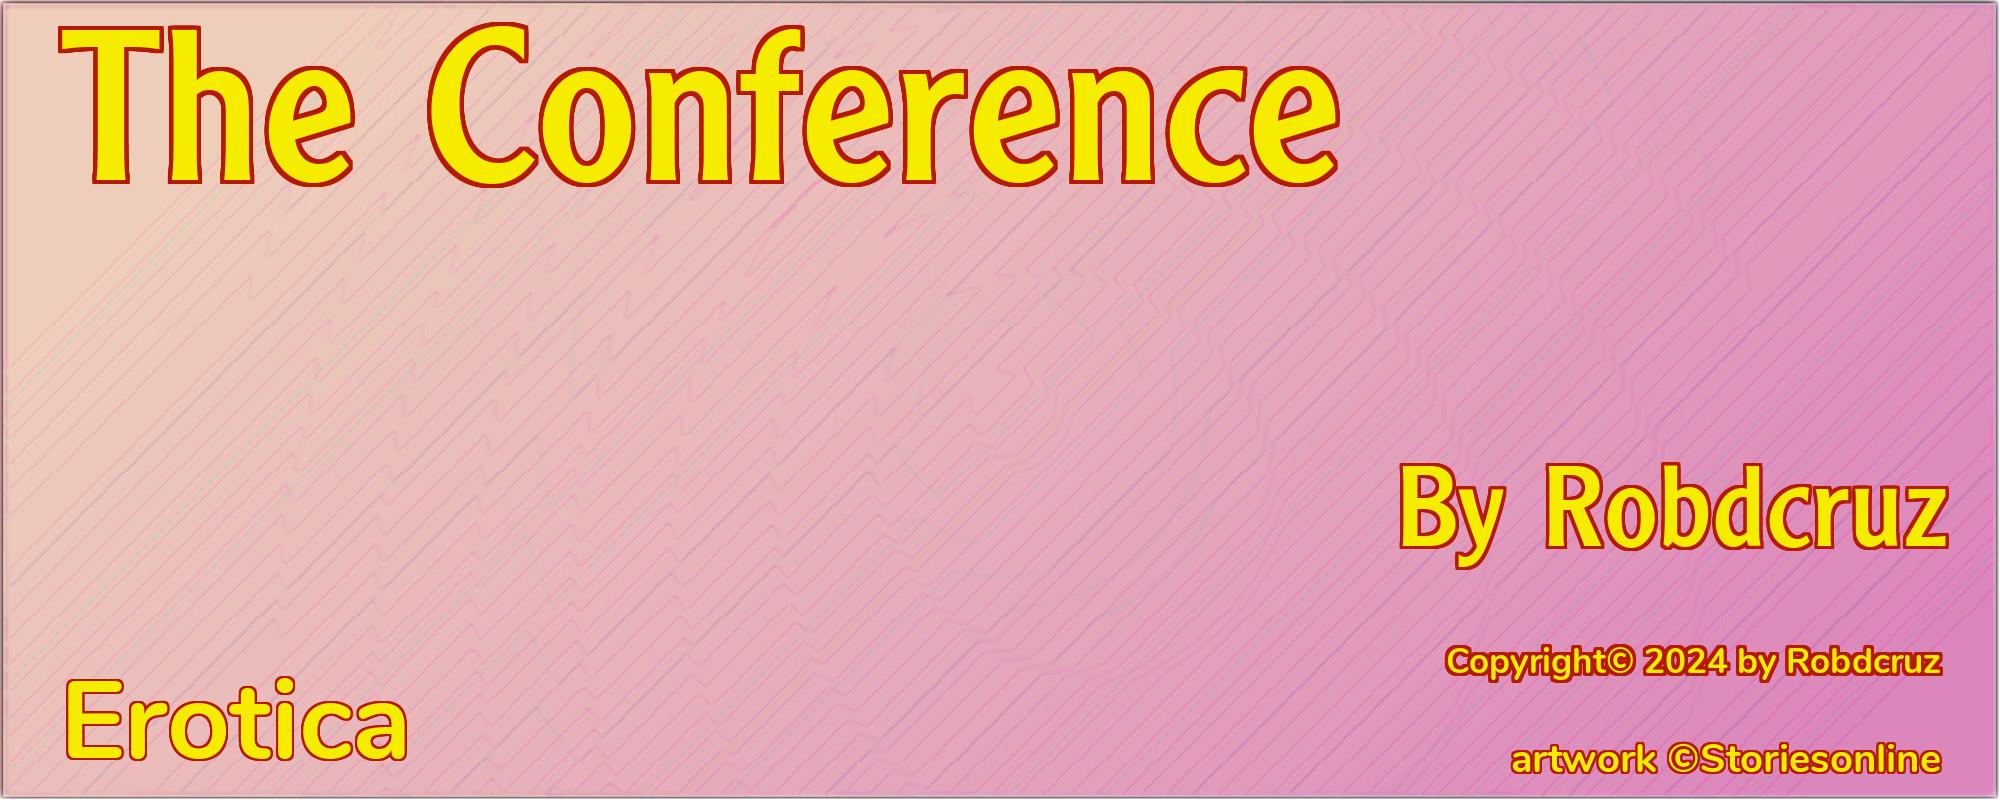 The Conference - Cover